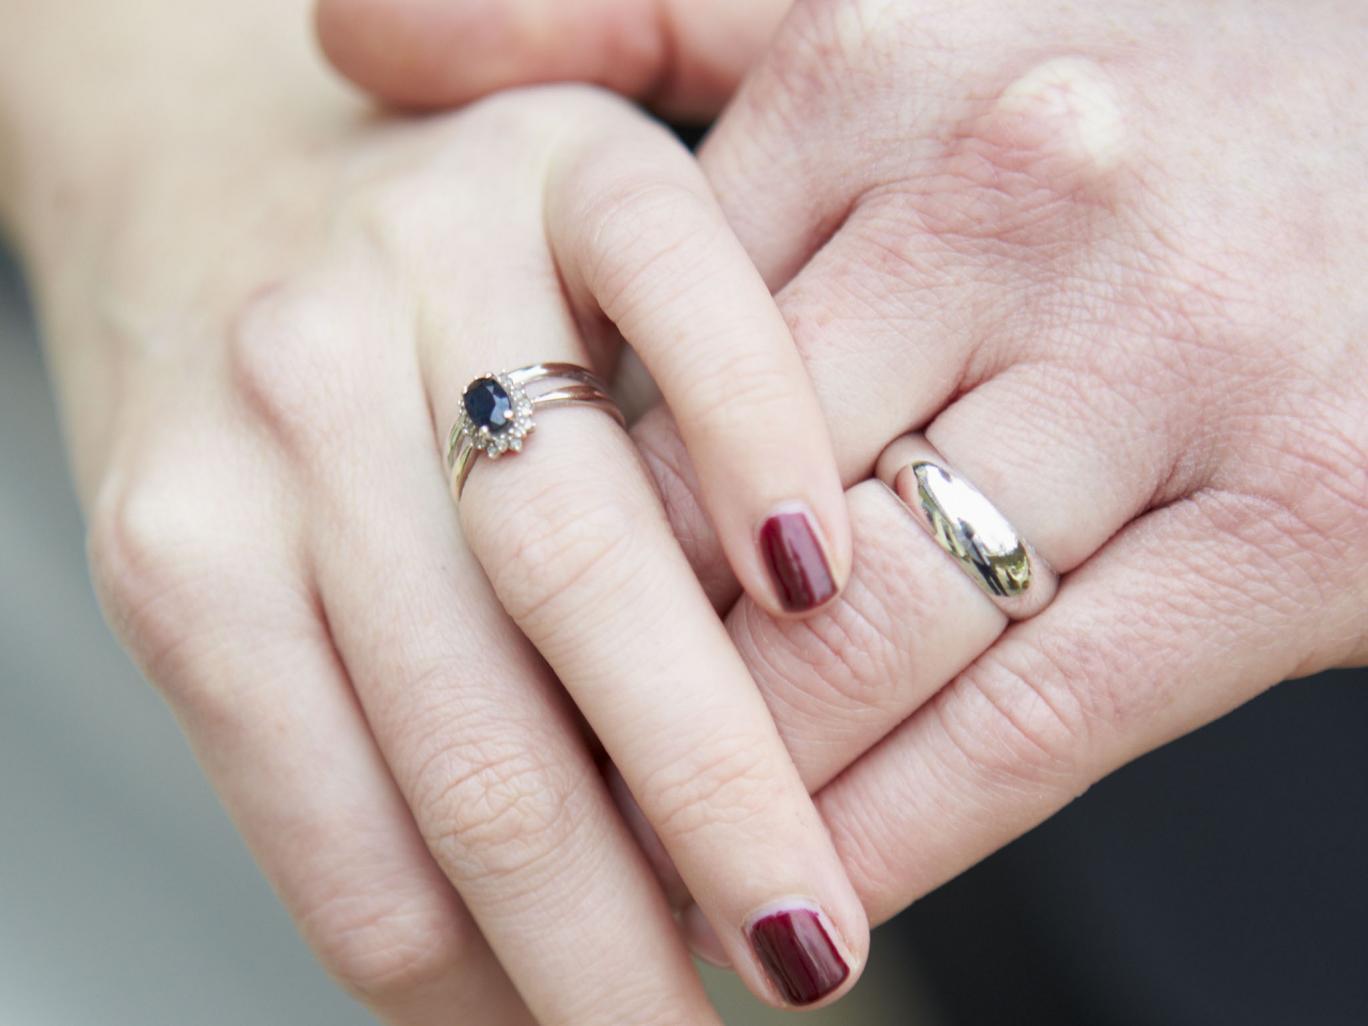 New York State Raises Legal Age Of Marriage From 14 To 18 In Bid To Prevent Forced Weddings For